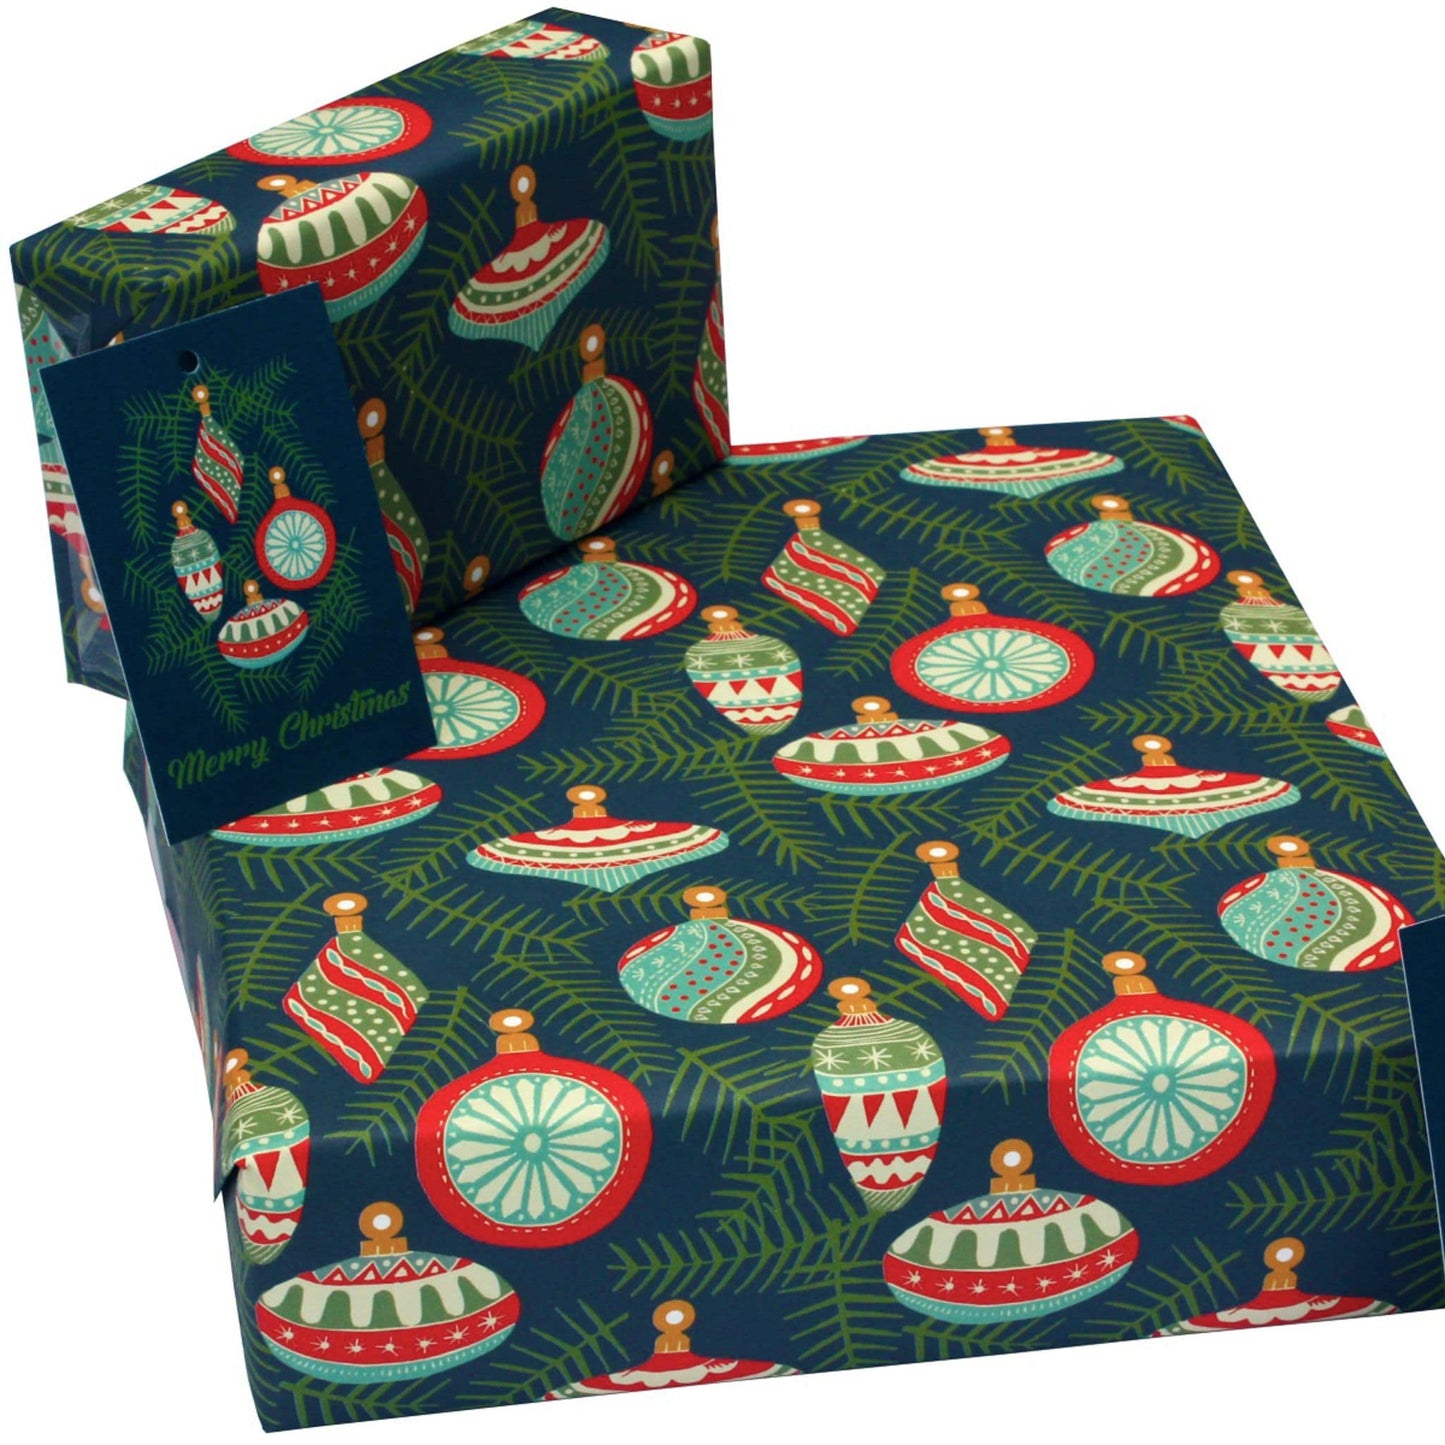 Recycled Christmas wrapping paper - Christmas baubles